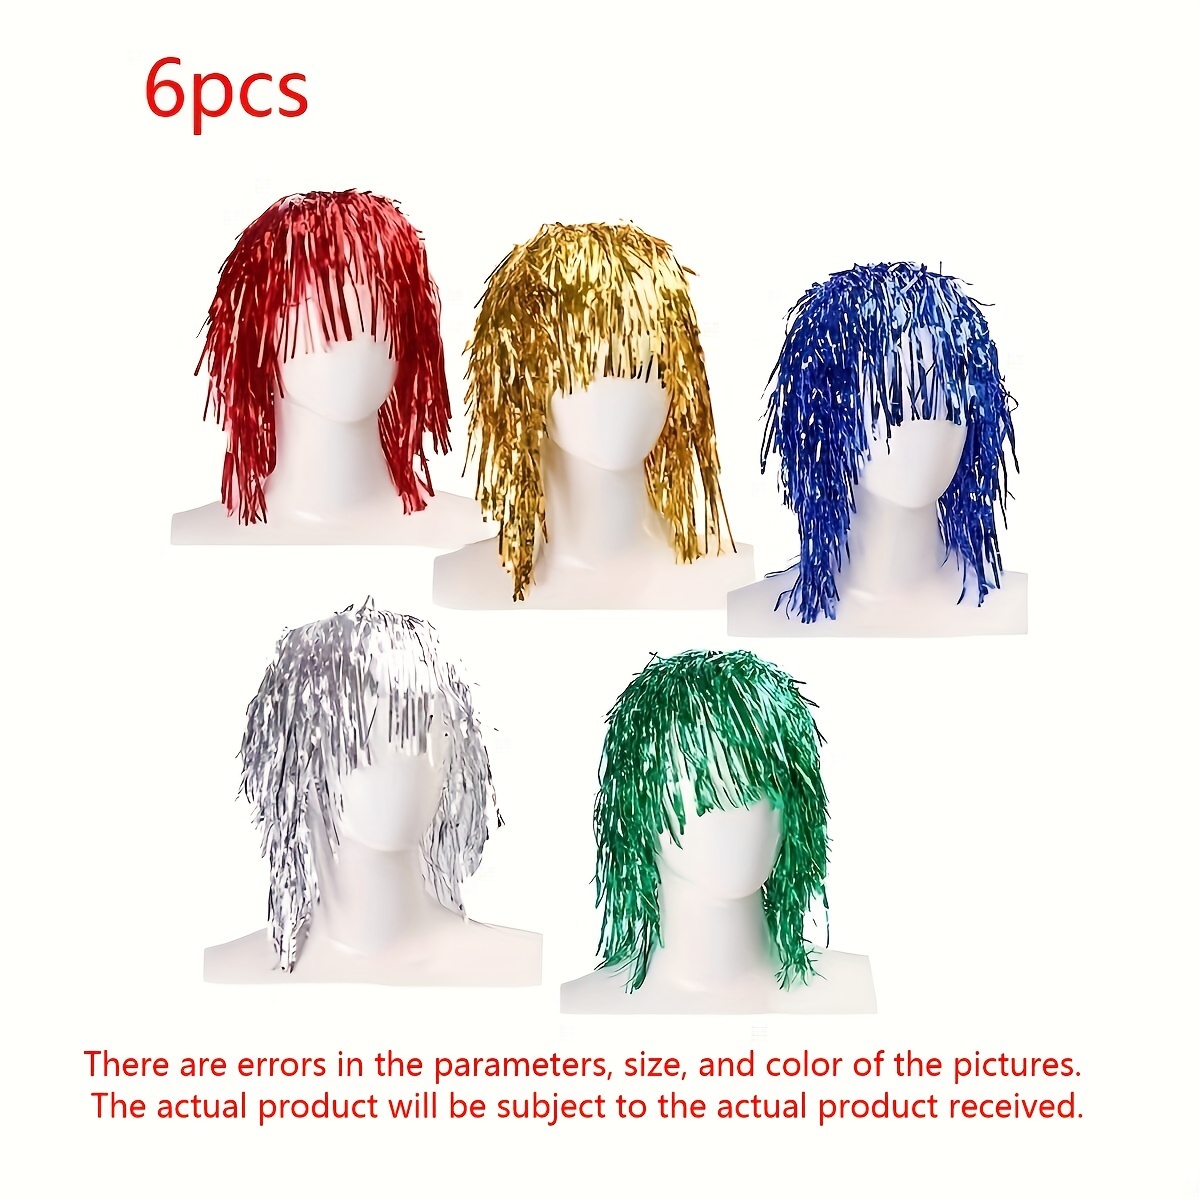 

Vibrant 6pcs Colorful Cosplay Wigs With Fun Party Hats - Ideal For Disco Costume Balls, Birthday Parties, Group Gatherings & Social Events, Plastic Material